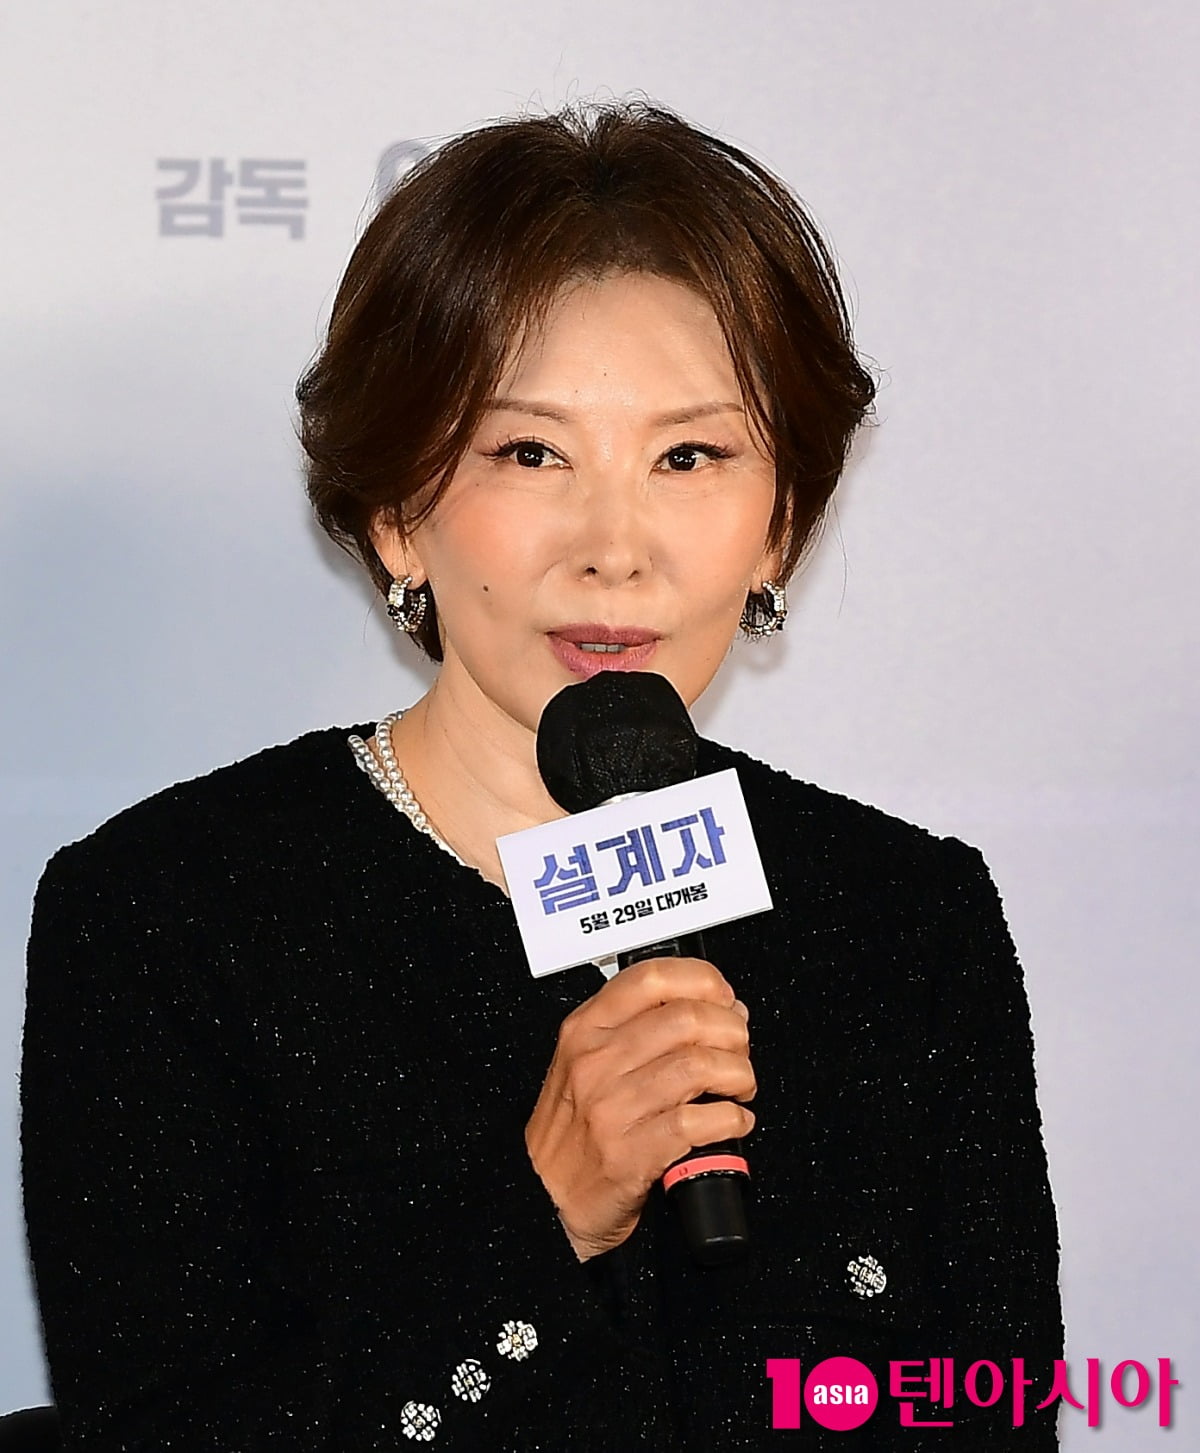 Lee Mi-sook was impressed by Kang Dong-won's perfect appearance.